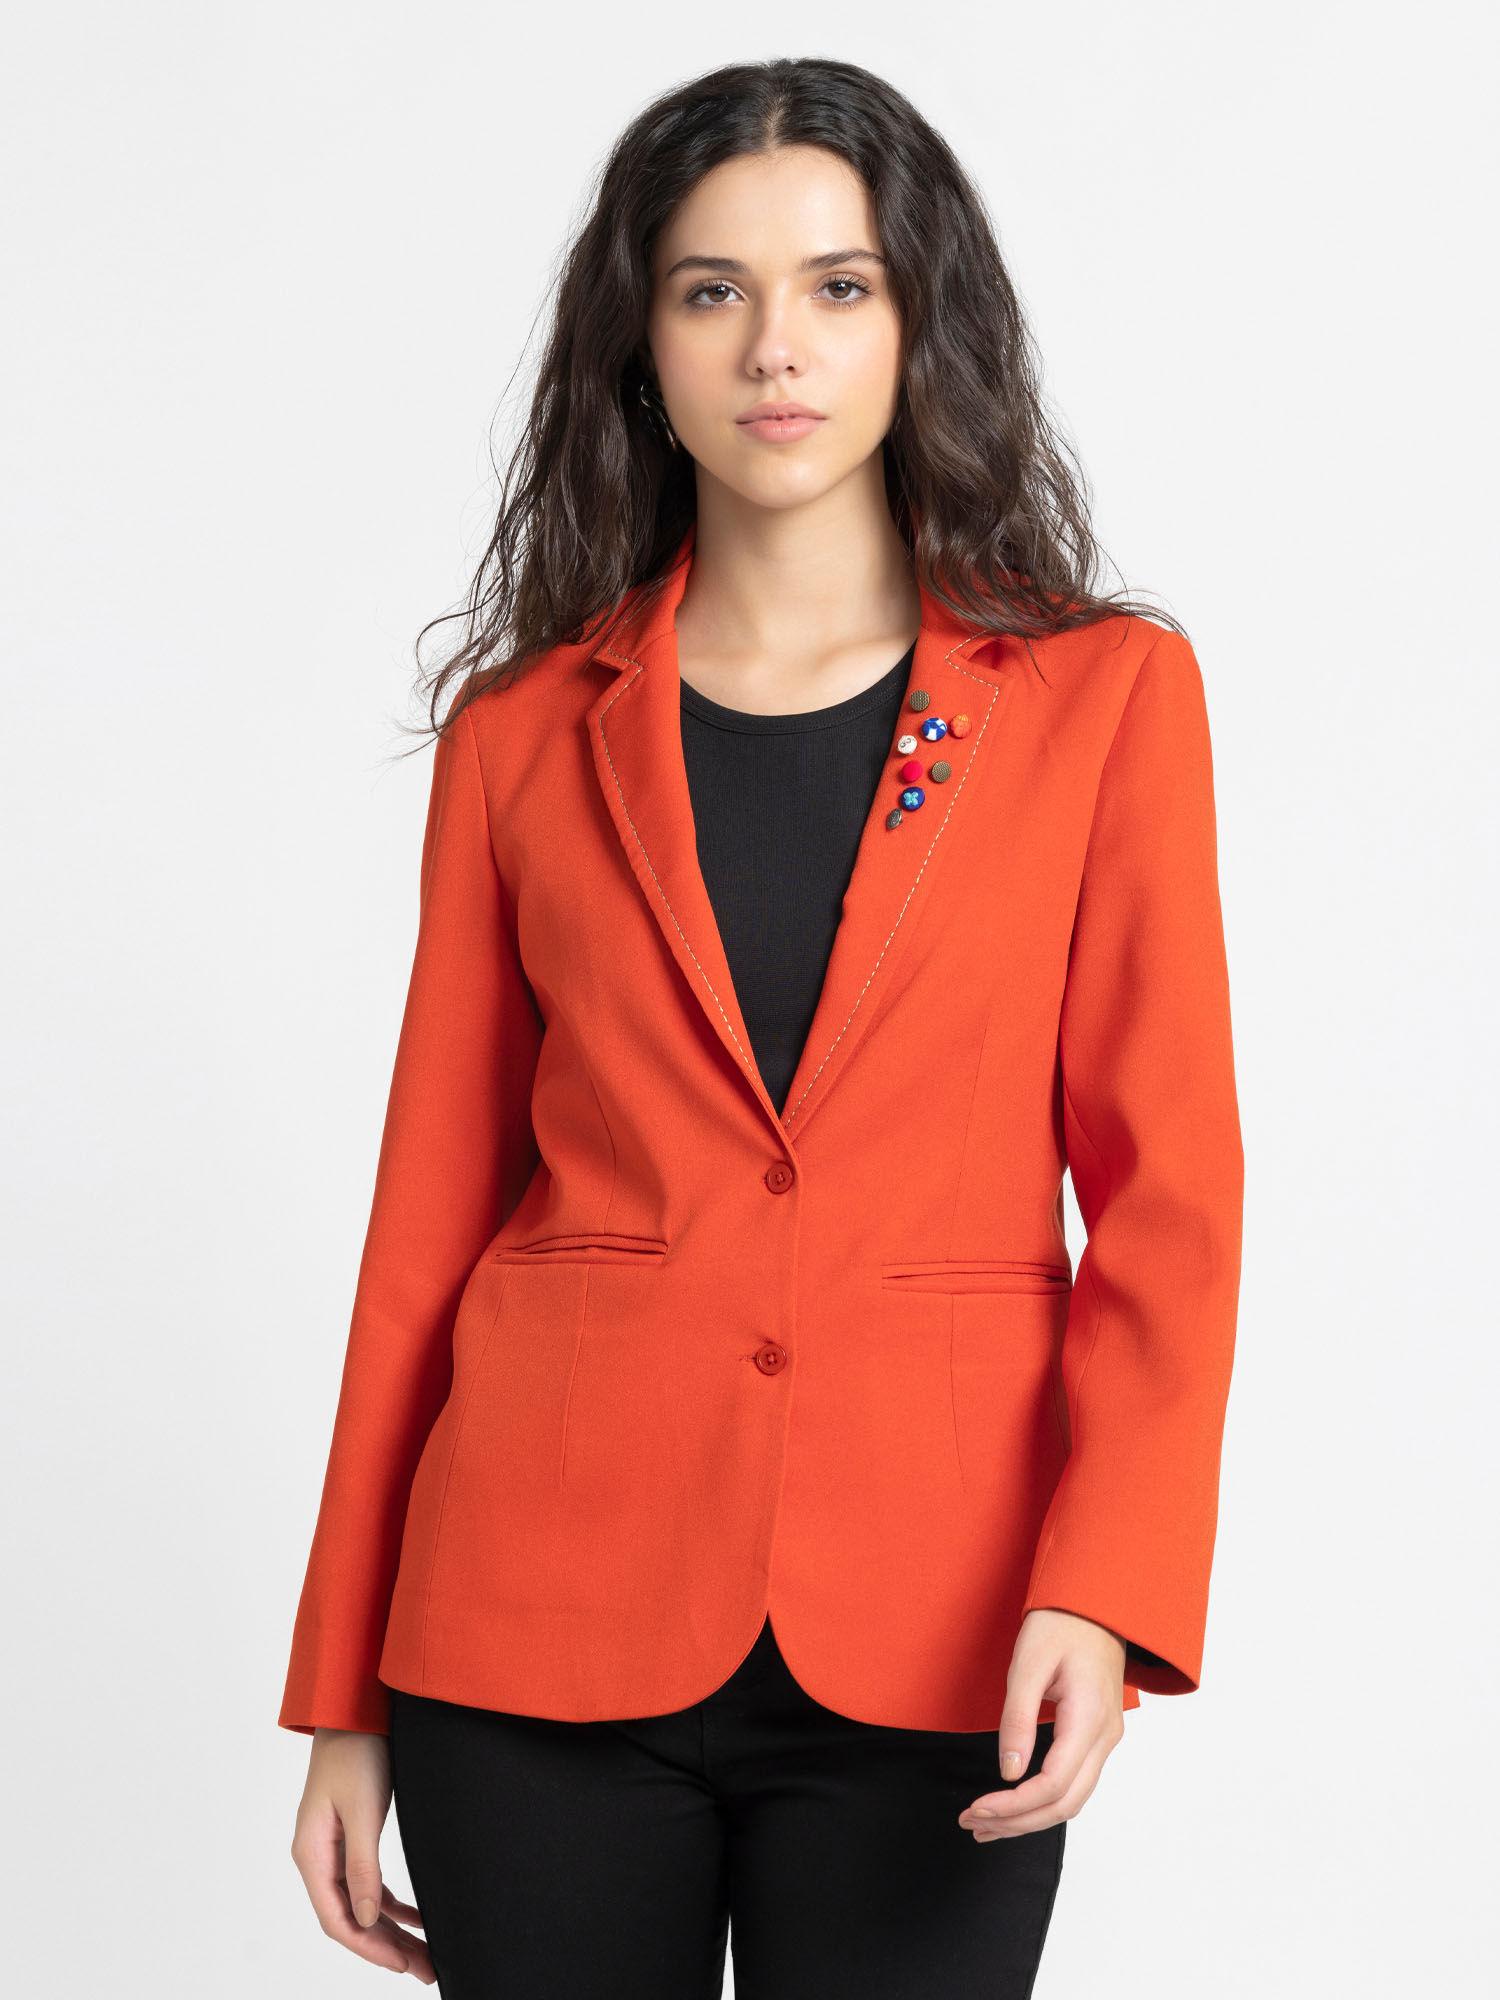 notched-lapel-orange-solid-full-sleeves-casual-blazer-for-women